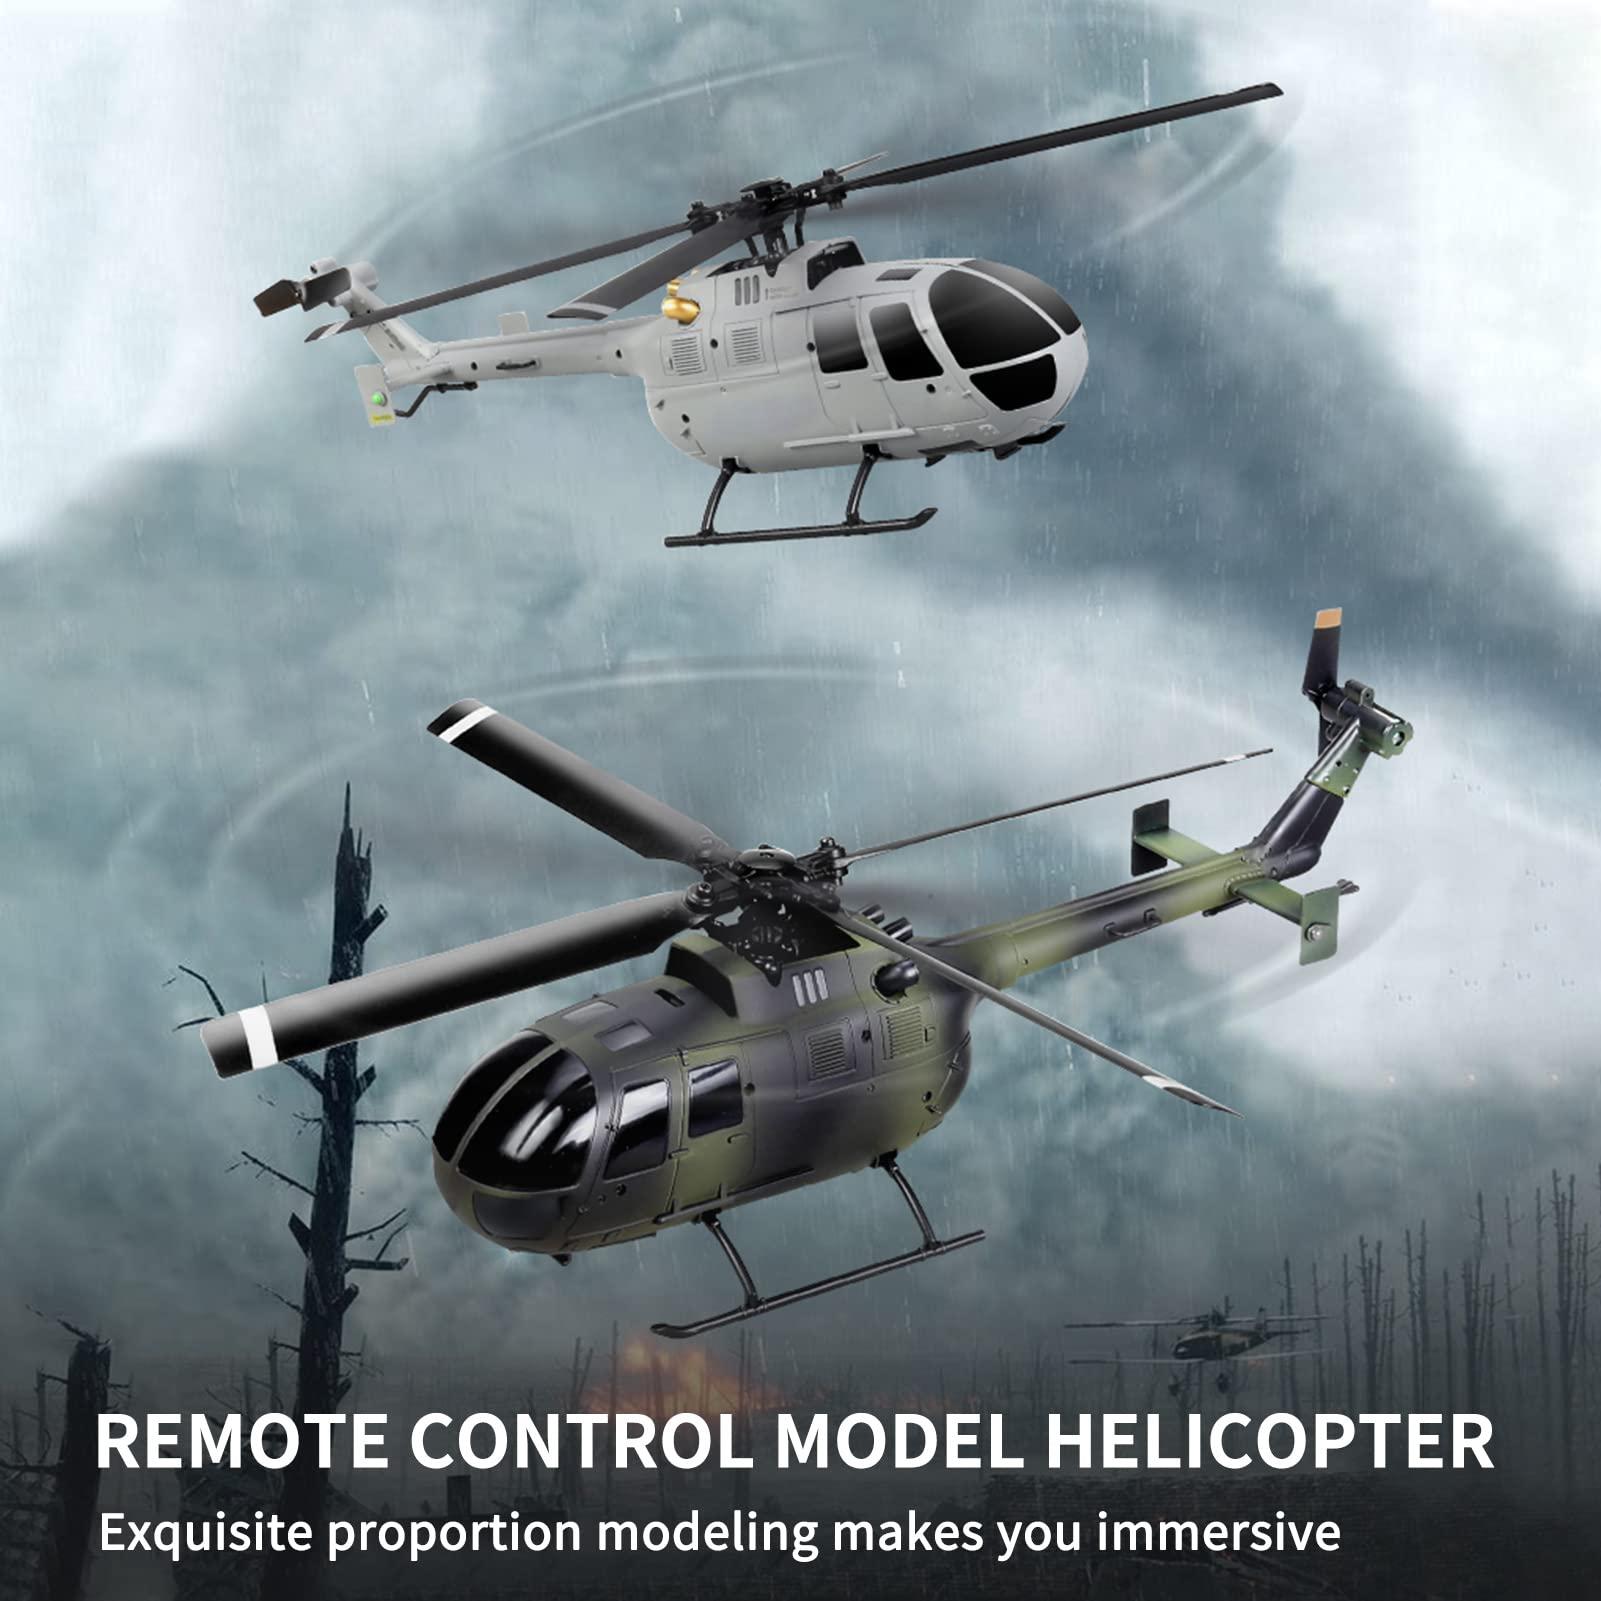 Gas Powered Rc Helicopter Amazon: Stay informed about the latest trends in gas powered RC helicopters on Amazon.